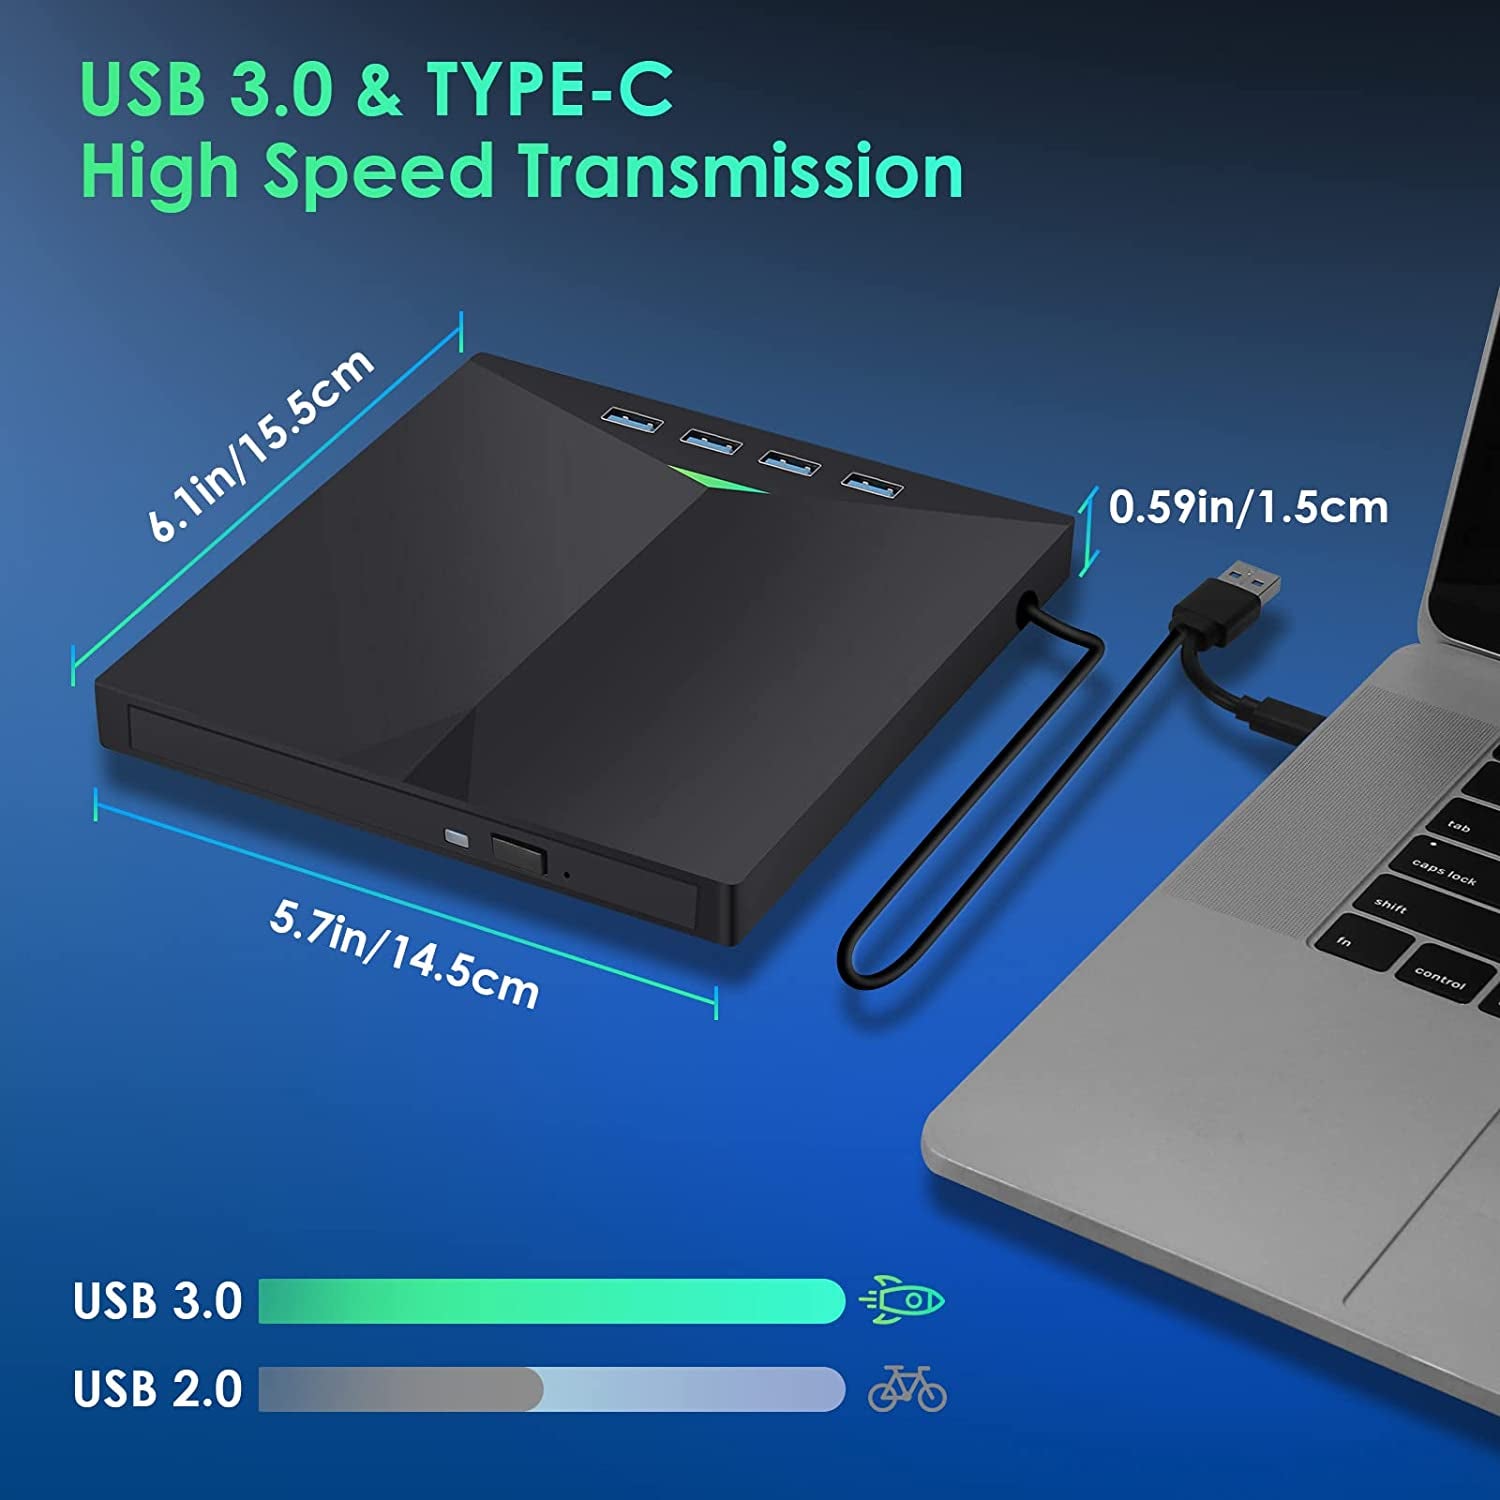 (7 in 1) Ultra-Slim USB 3.0 External CD/DVD Drive for Laptop and Desktop, Portable Burner Writer Compatible with Mac, MacBook Pro/Air, iMac, and Windows XP/7/8/10/Vista 